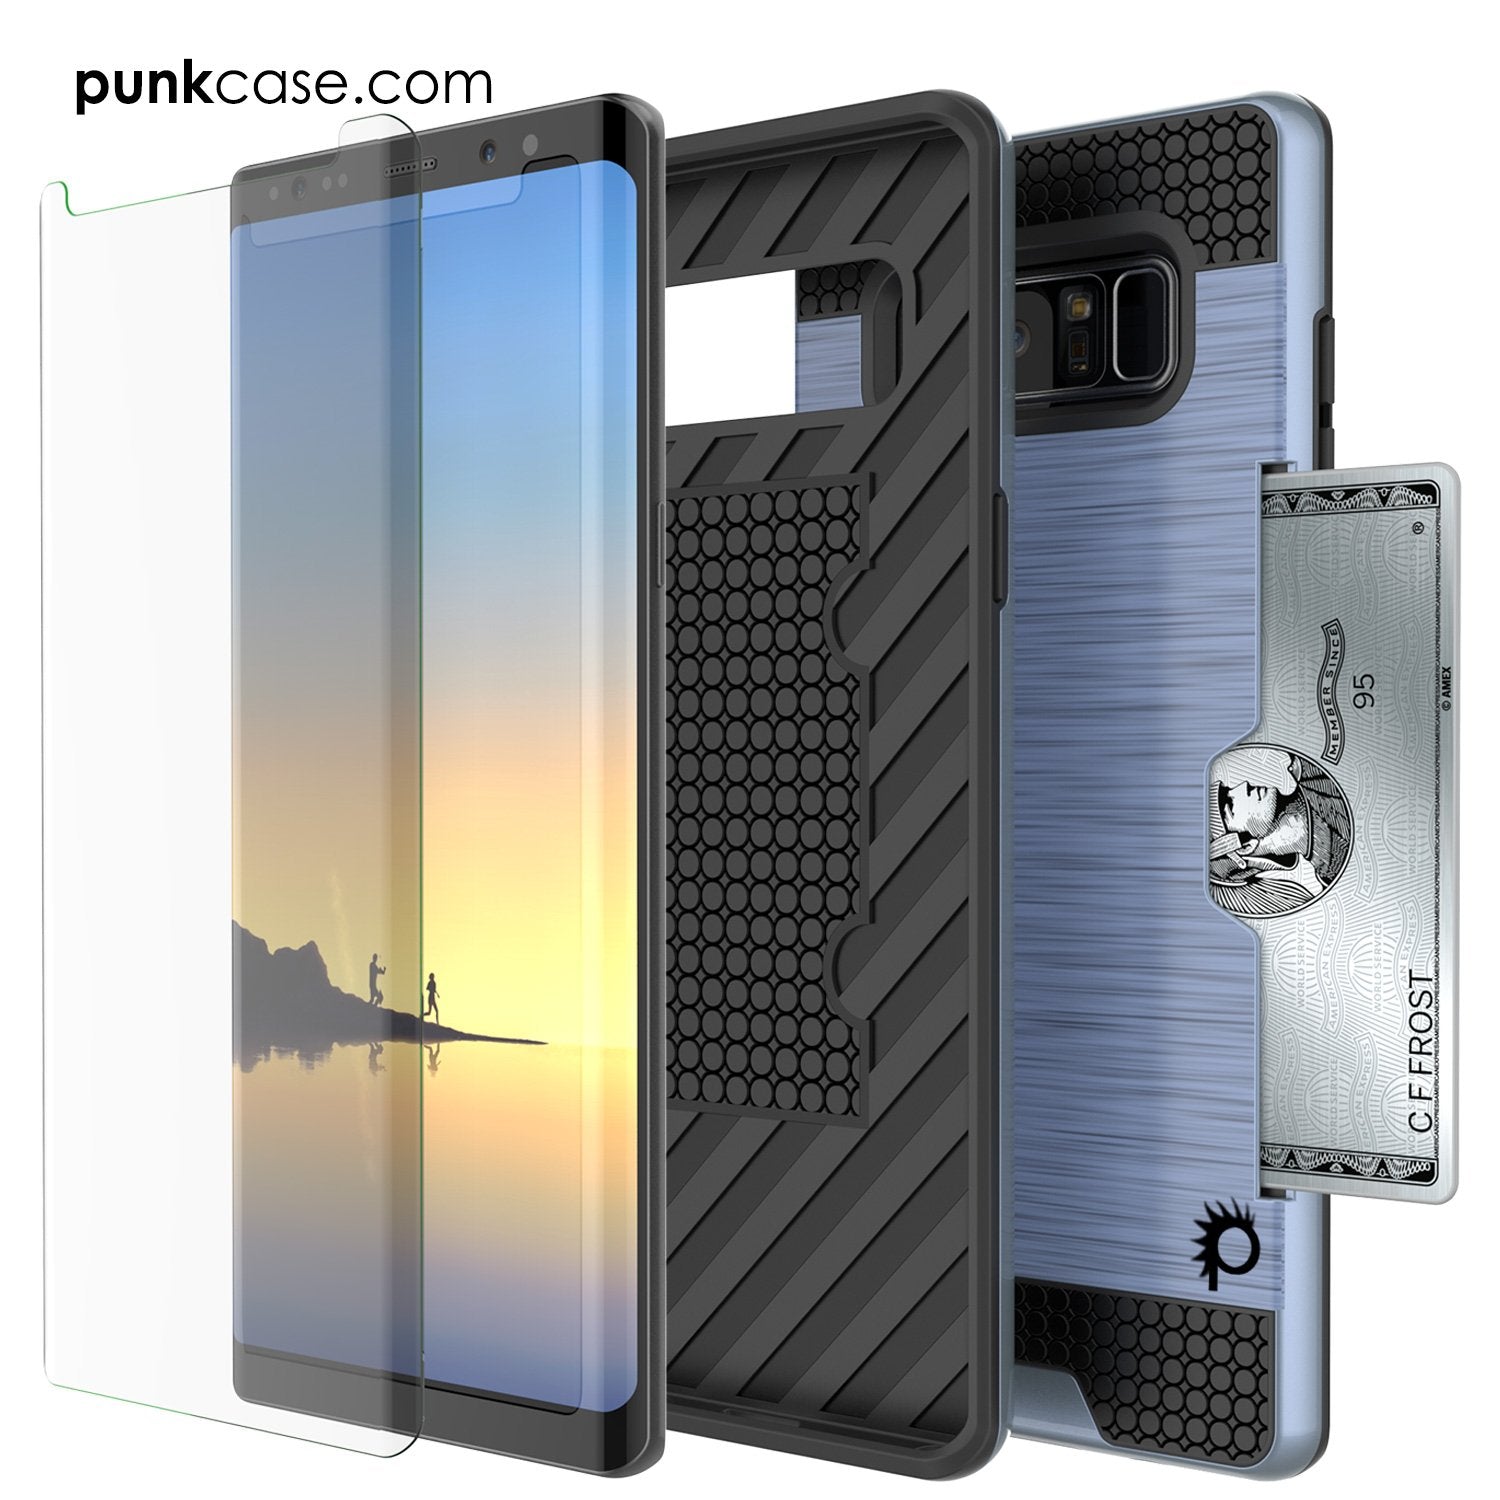 Galaxy Note 8 Case, PUNKcase [SLOT Series] Slim Fit for Samsung Note 8 [Navy]